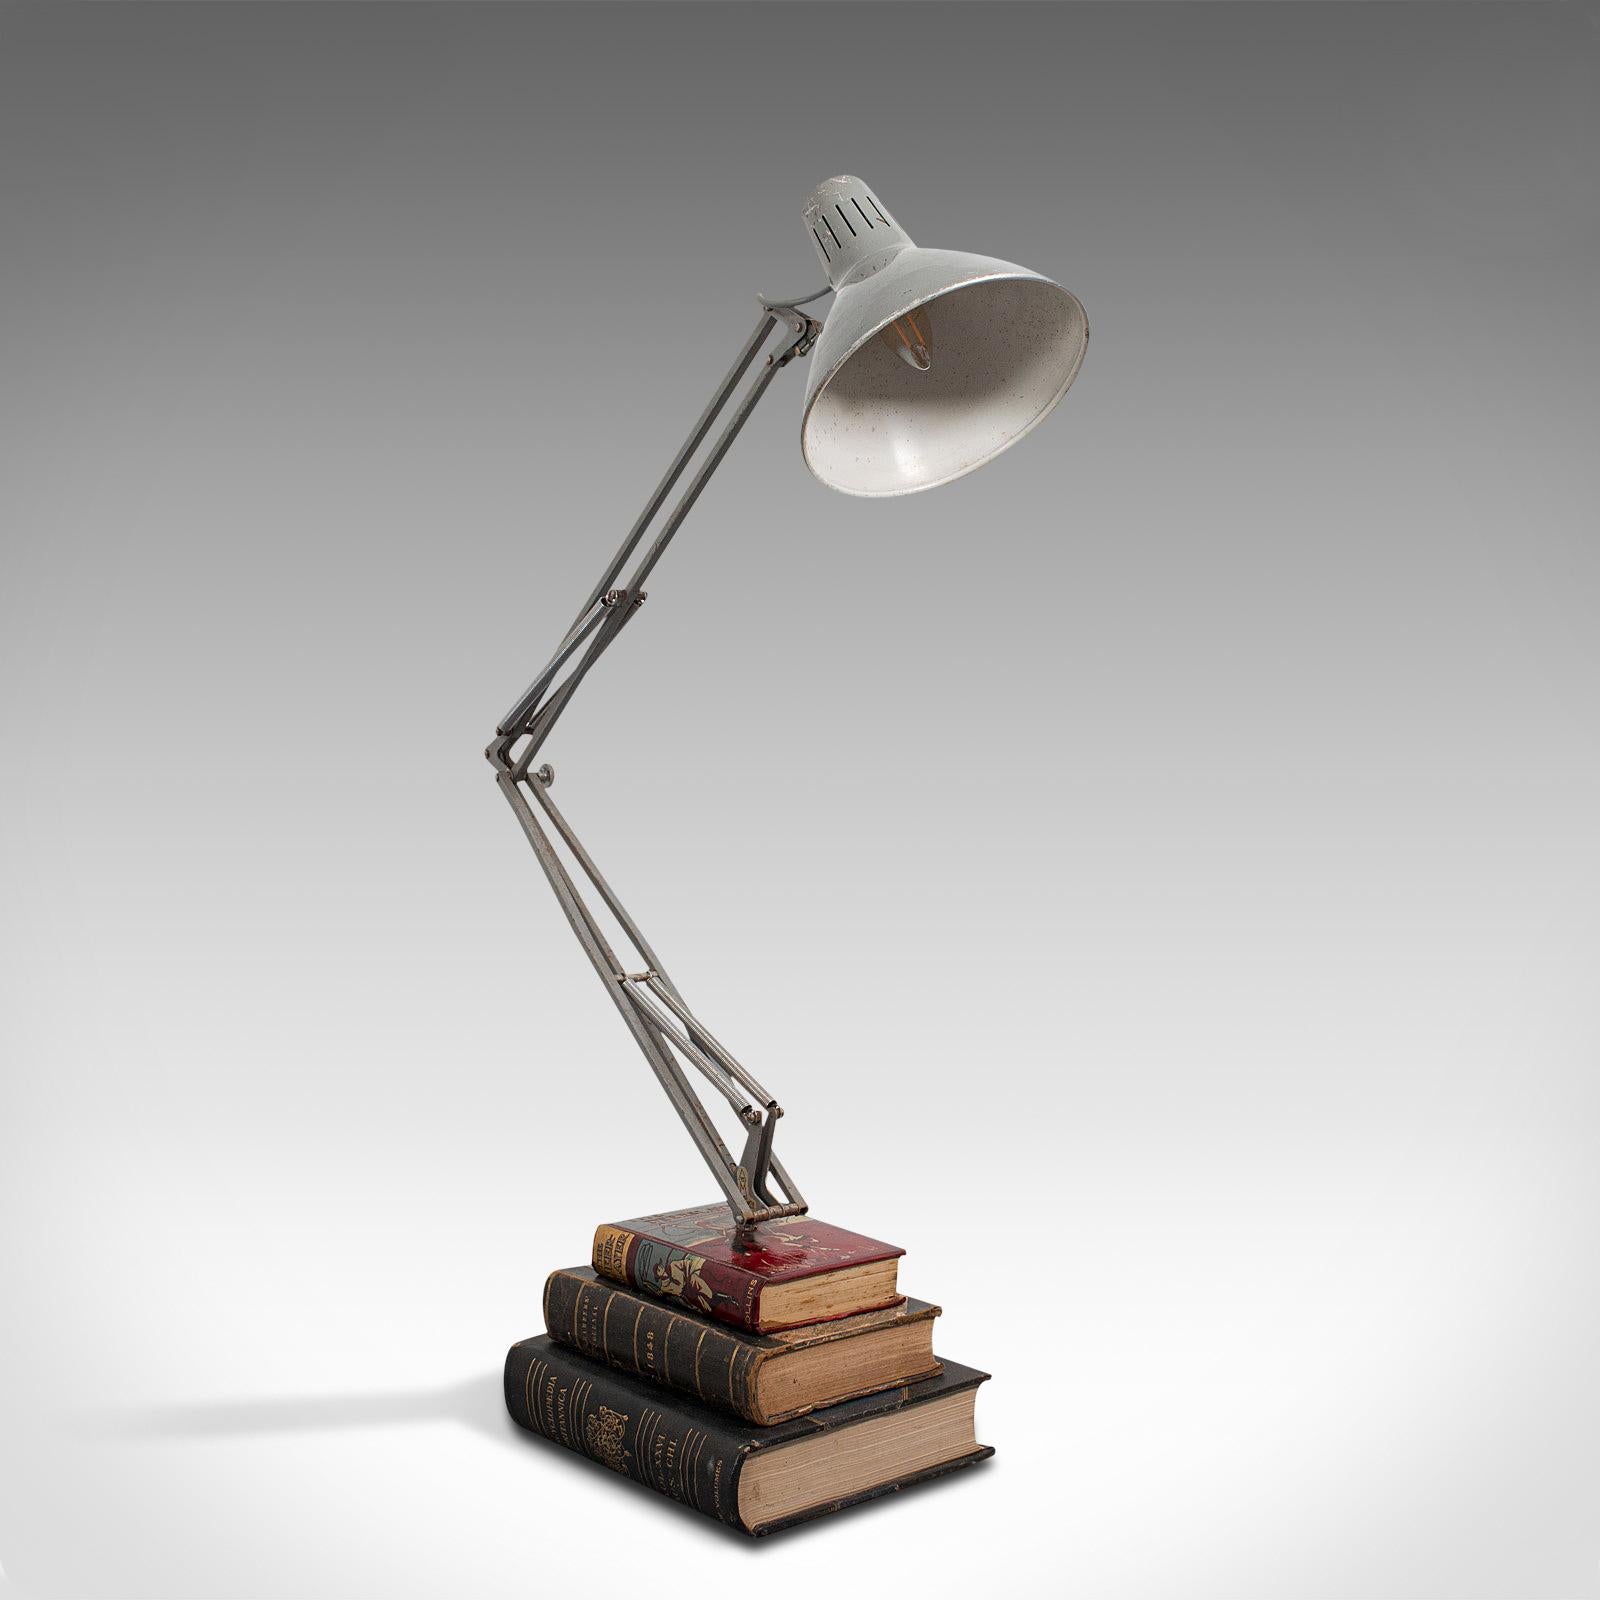 This is a vintage anglepoise lamp. An English, steel and aluminium desk or architect's light with bibliophile base, dating to the mid-20th century, circa 1960.

Pleasingly mounted lamp suitable for the bibliophile
Displaying a desirable aged